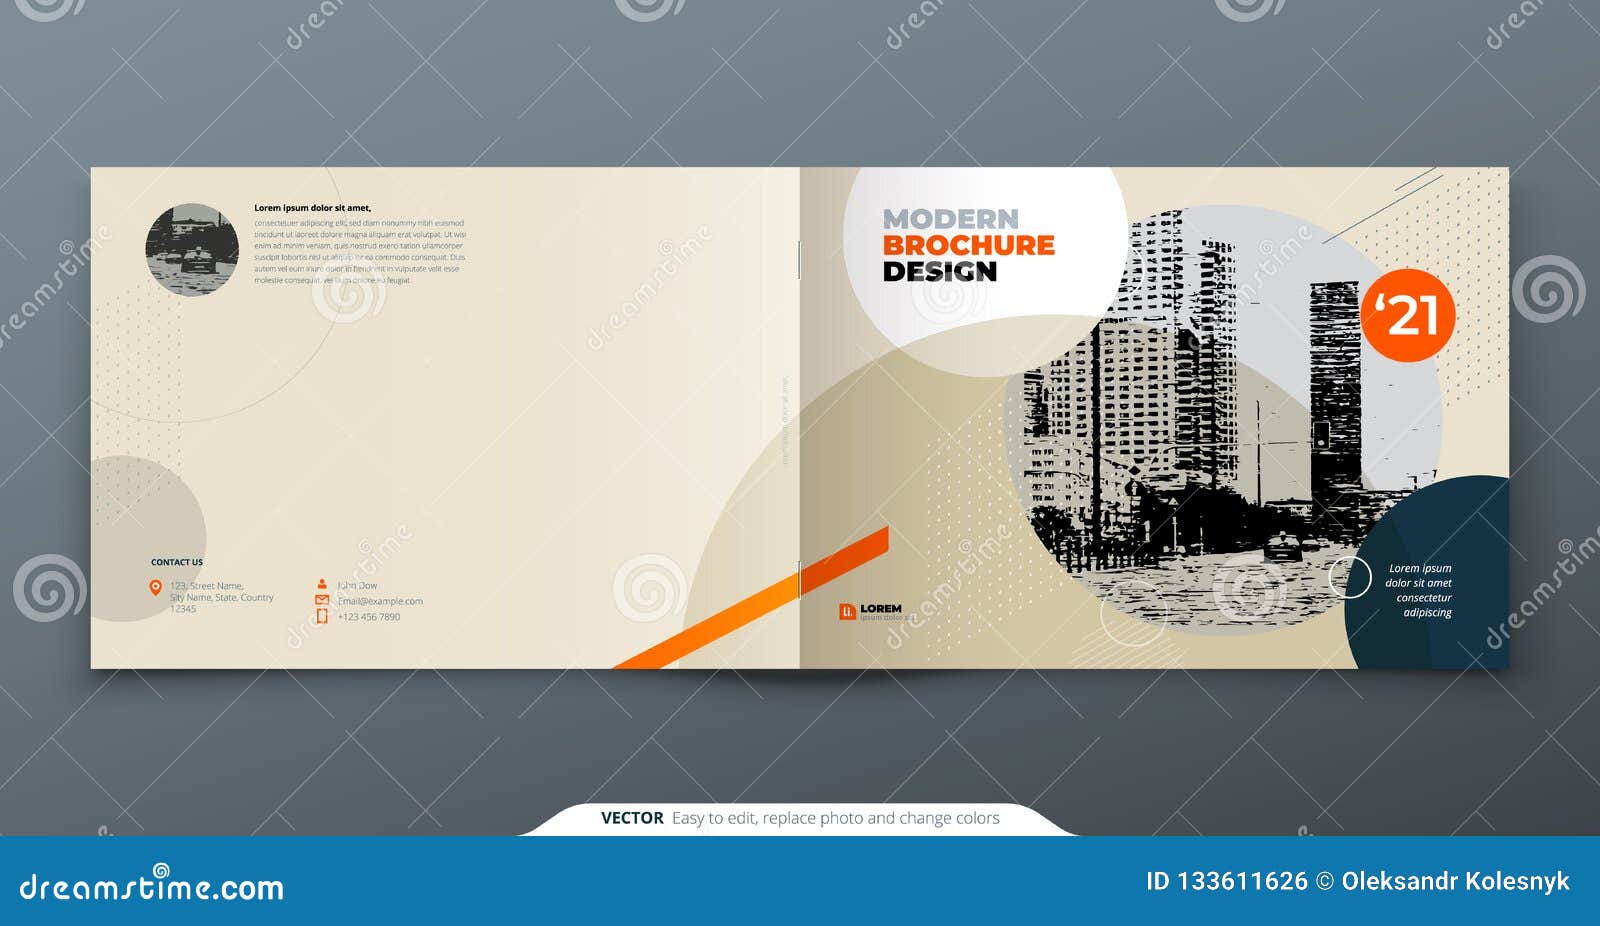 Download Brochure Template Layout Design Corporate Business Annual Report Catalog Magazine Brochure Flyer Mockup Creative Stock Vector Illustration Of Circle Architecture 133611626